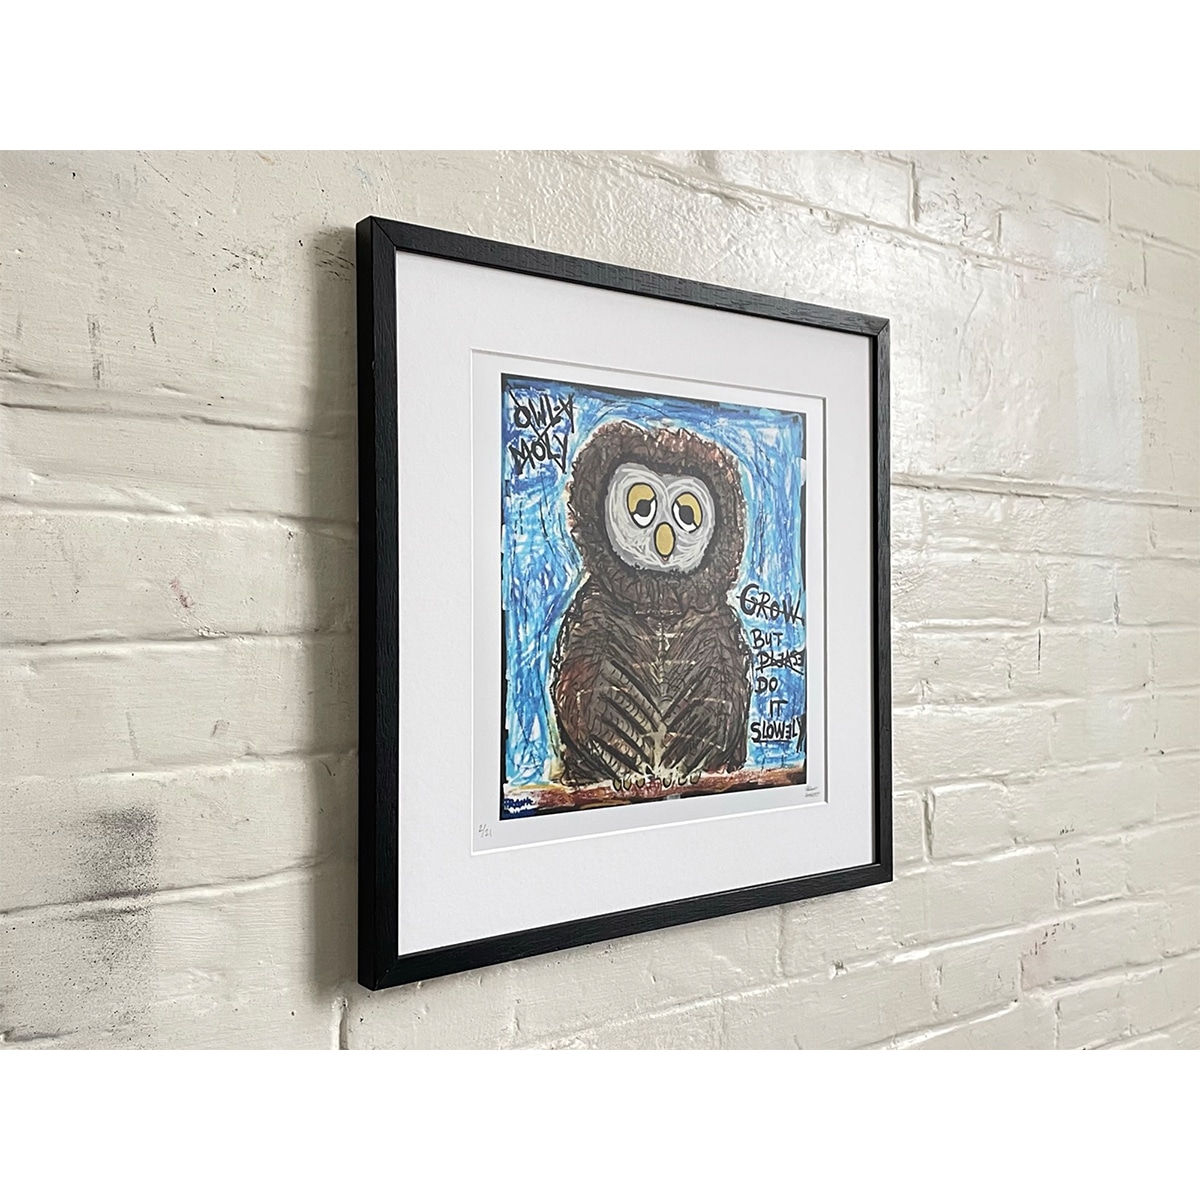 Limited Edt Art Prints -_0000__0000_OWL-Y MOLY 01 - Frank Willems